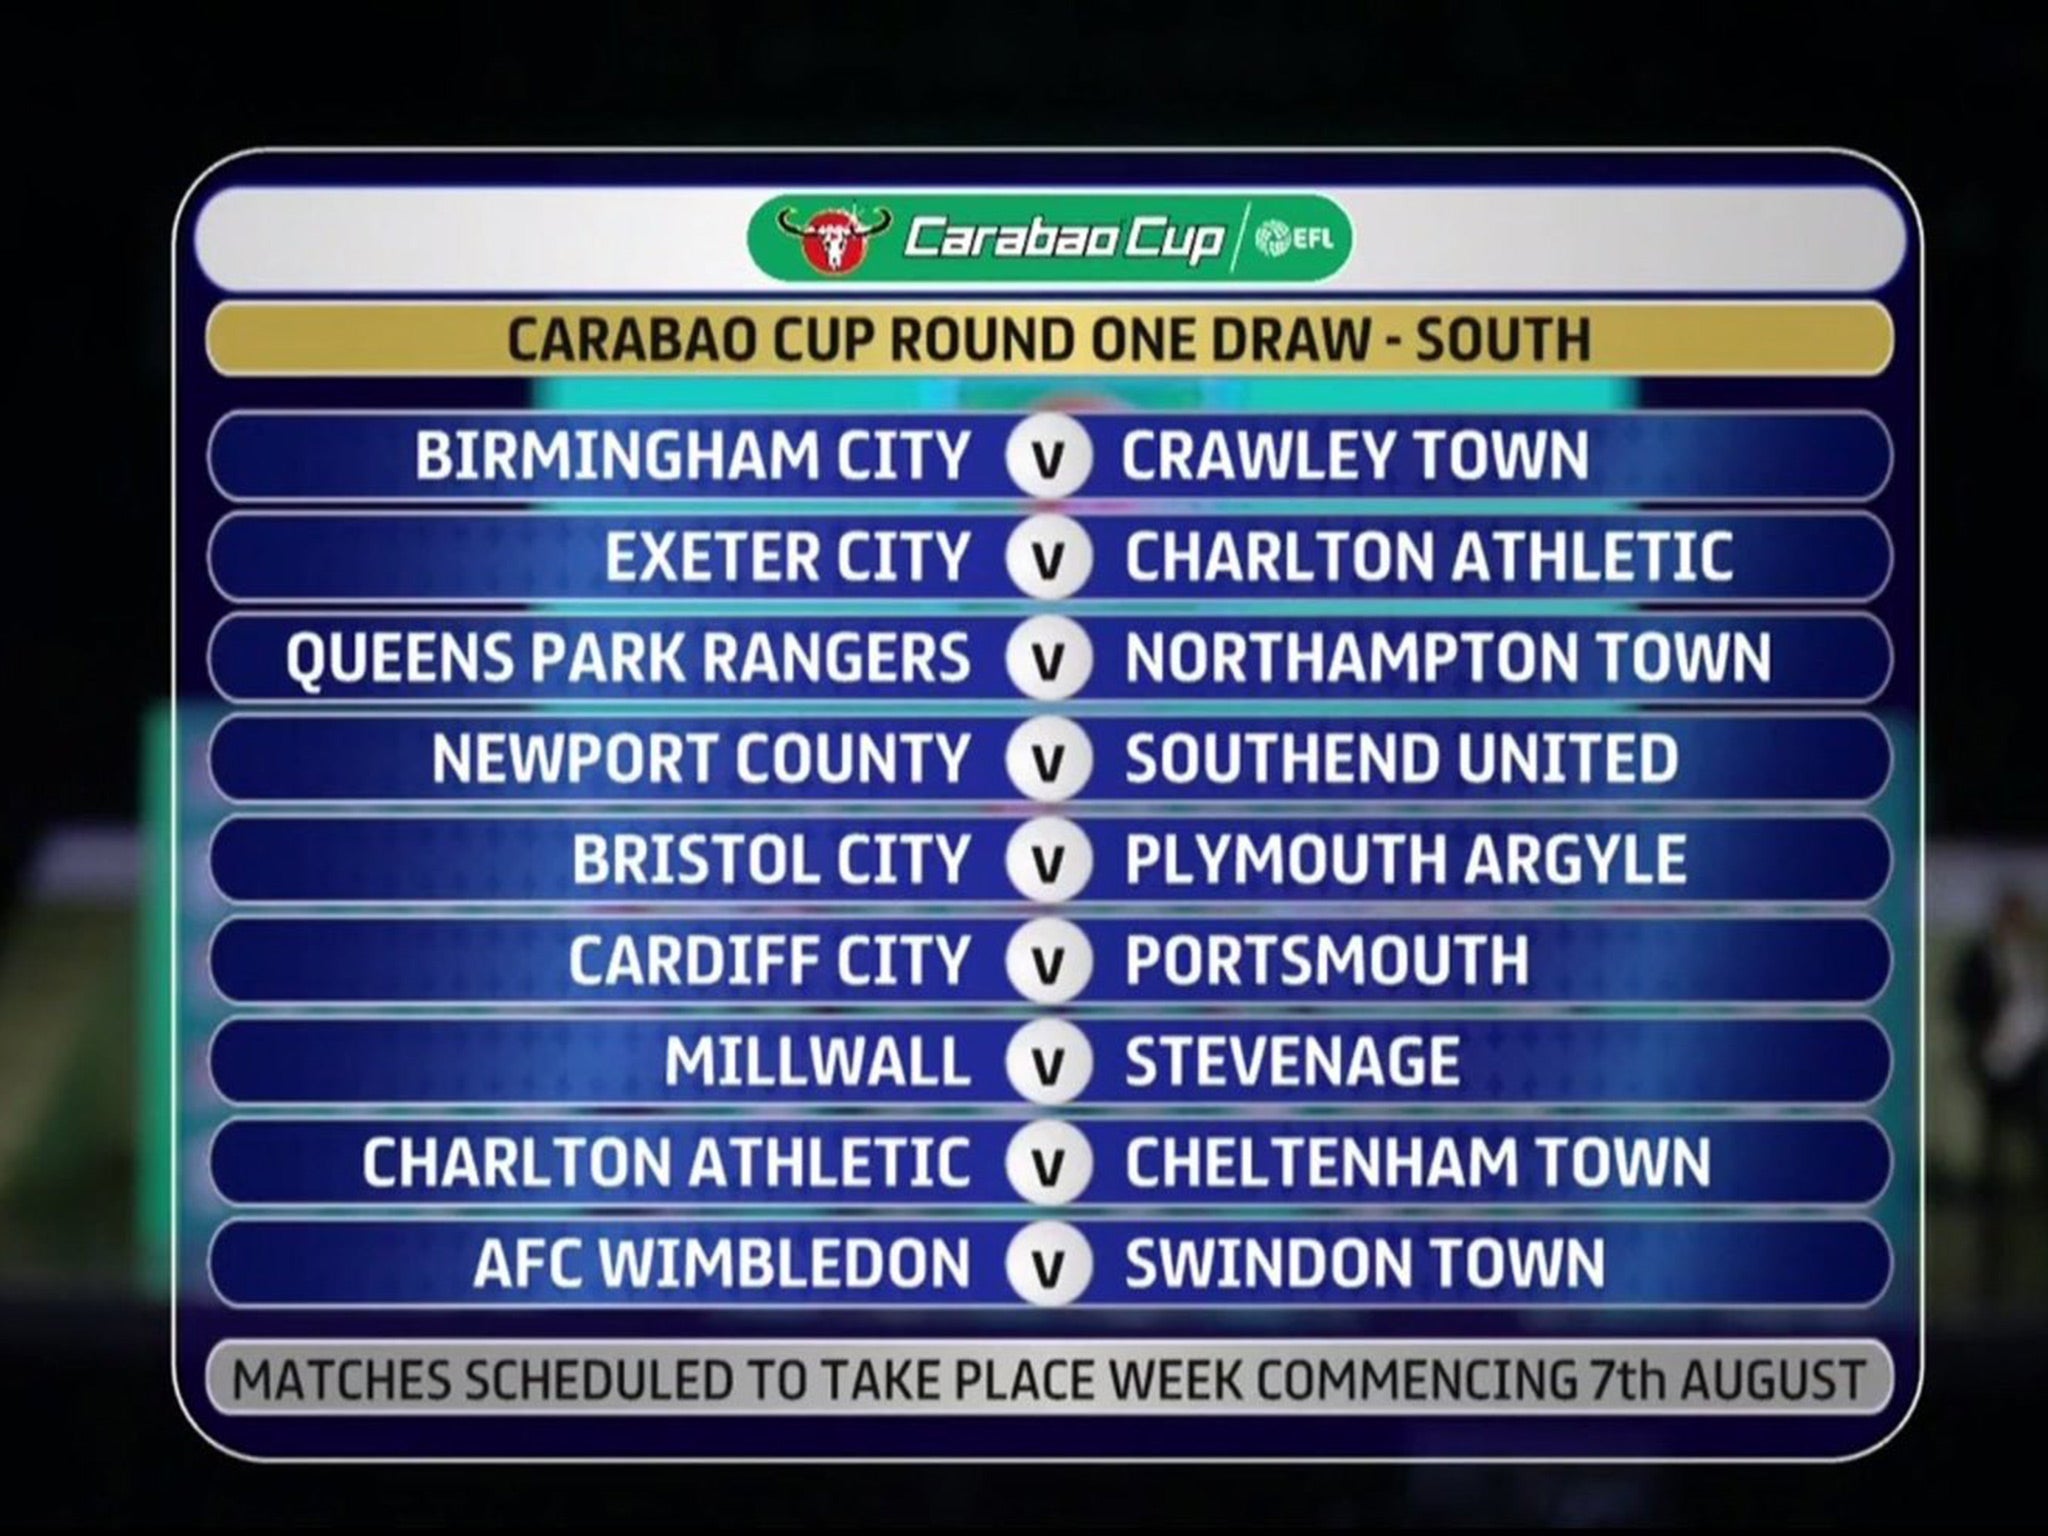 Charlton Athletic drawn twice due to graphics error in EFL Carabao Cup draw The Independent The Independent